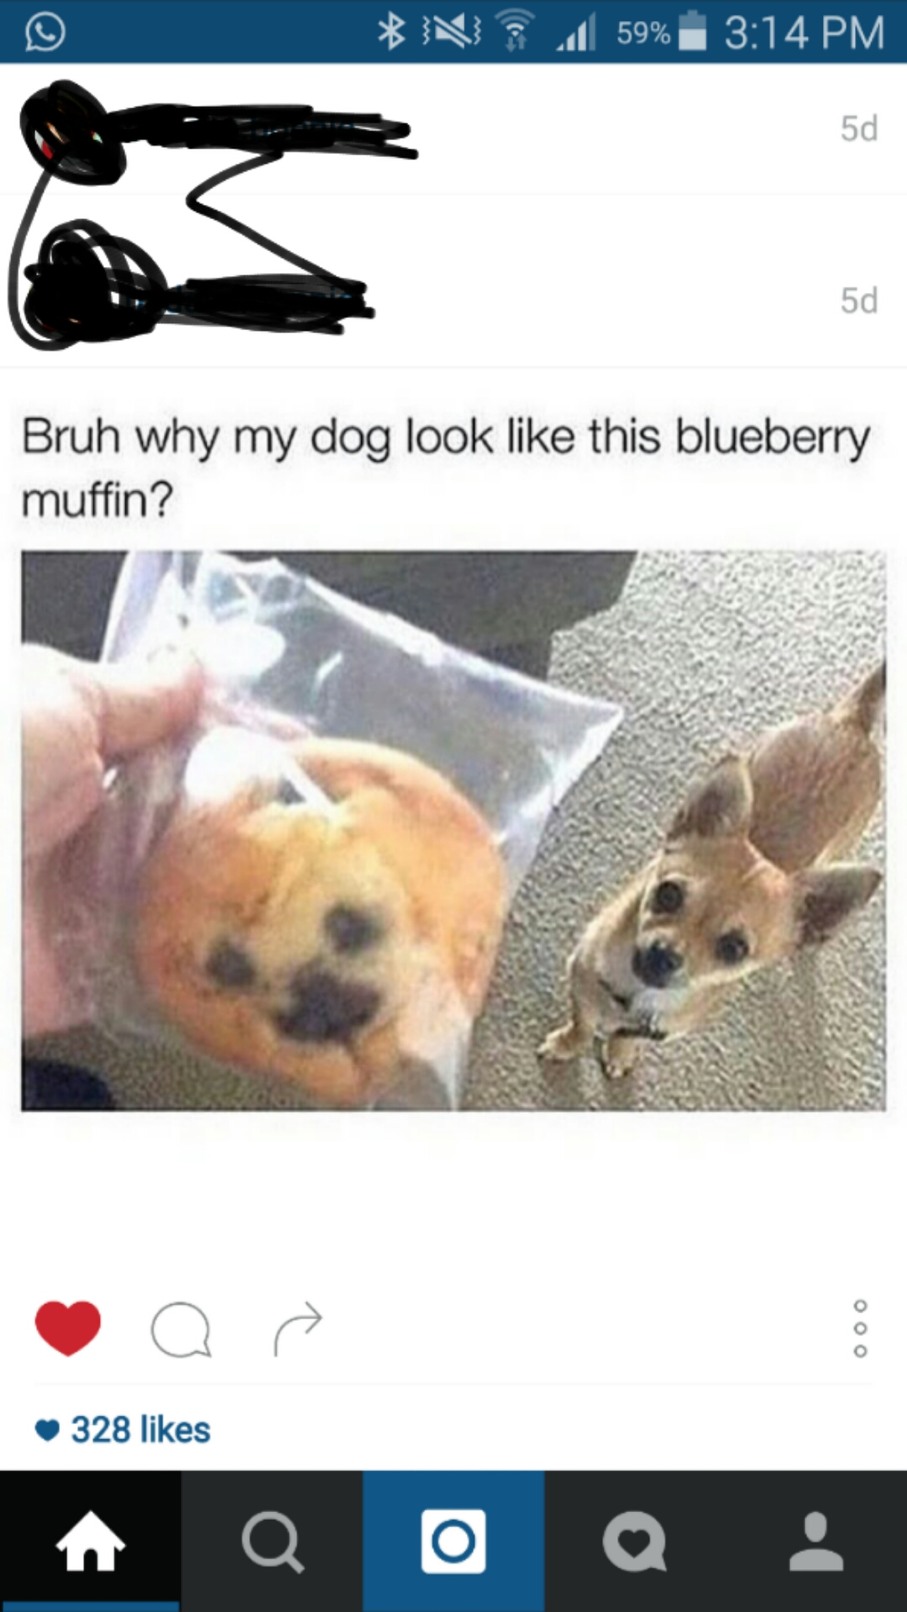 5th comment is a muffin - meme